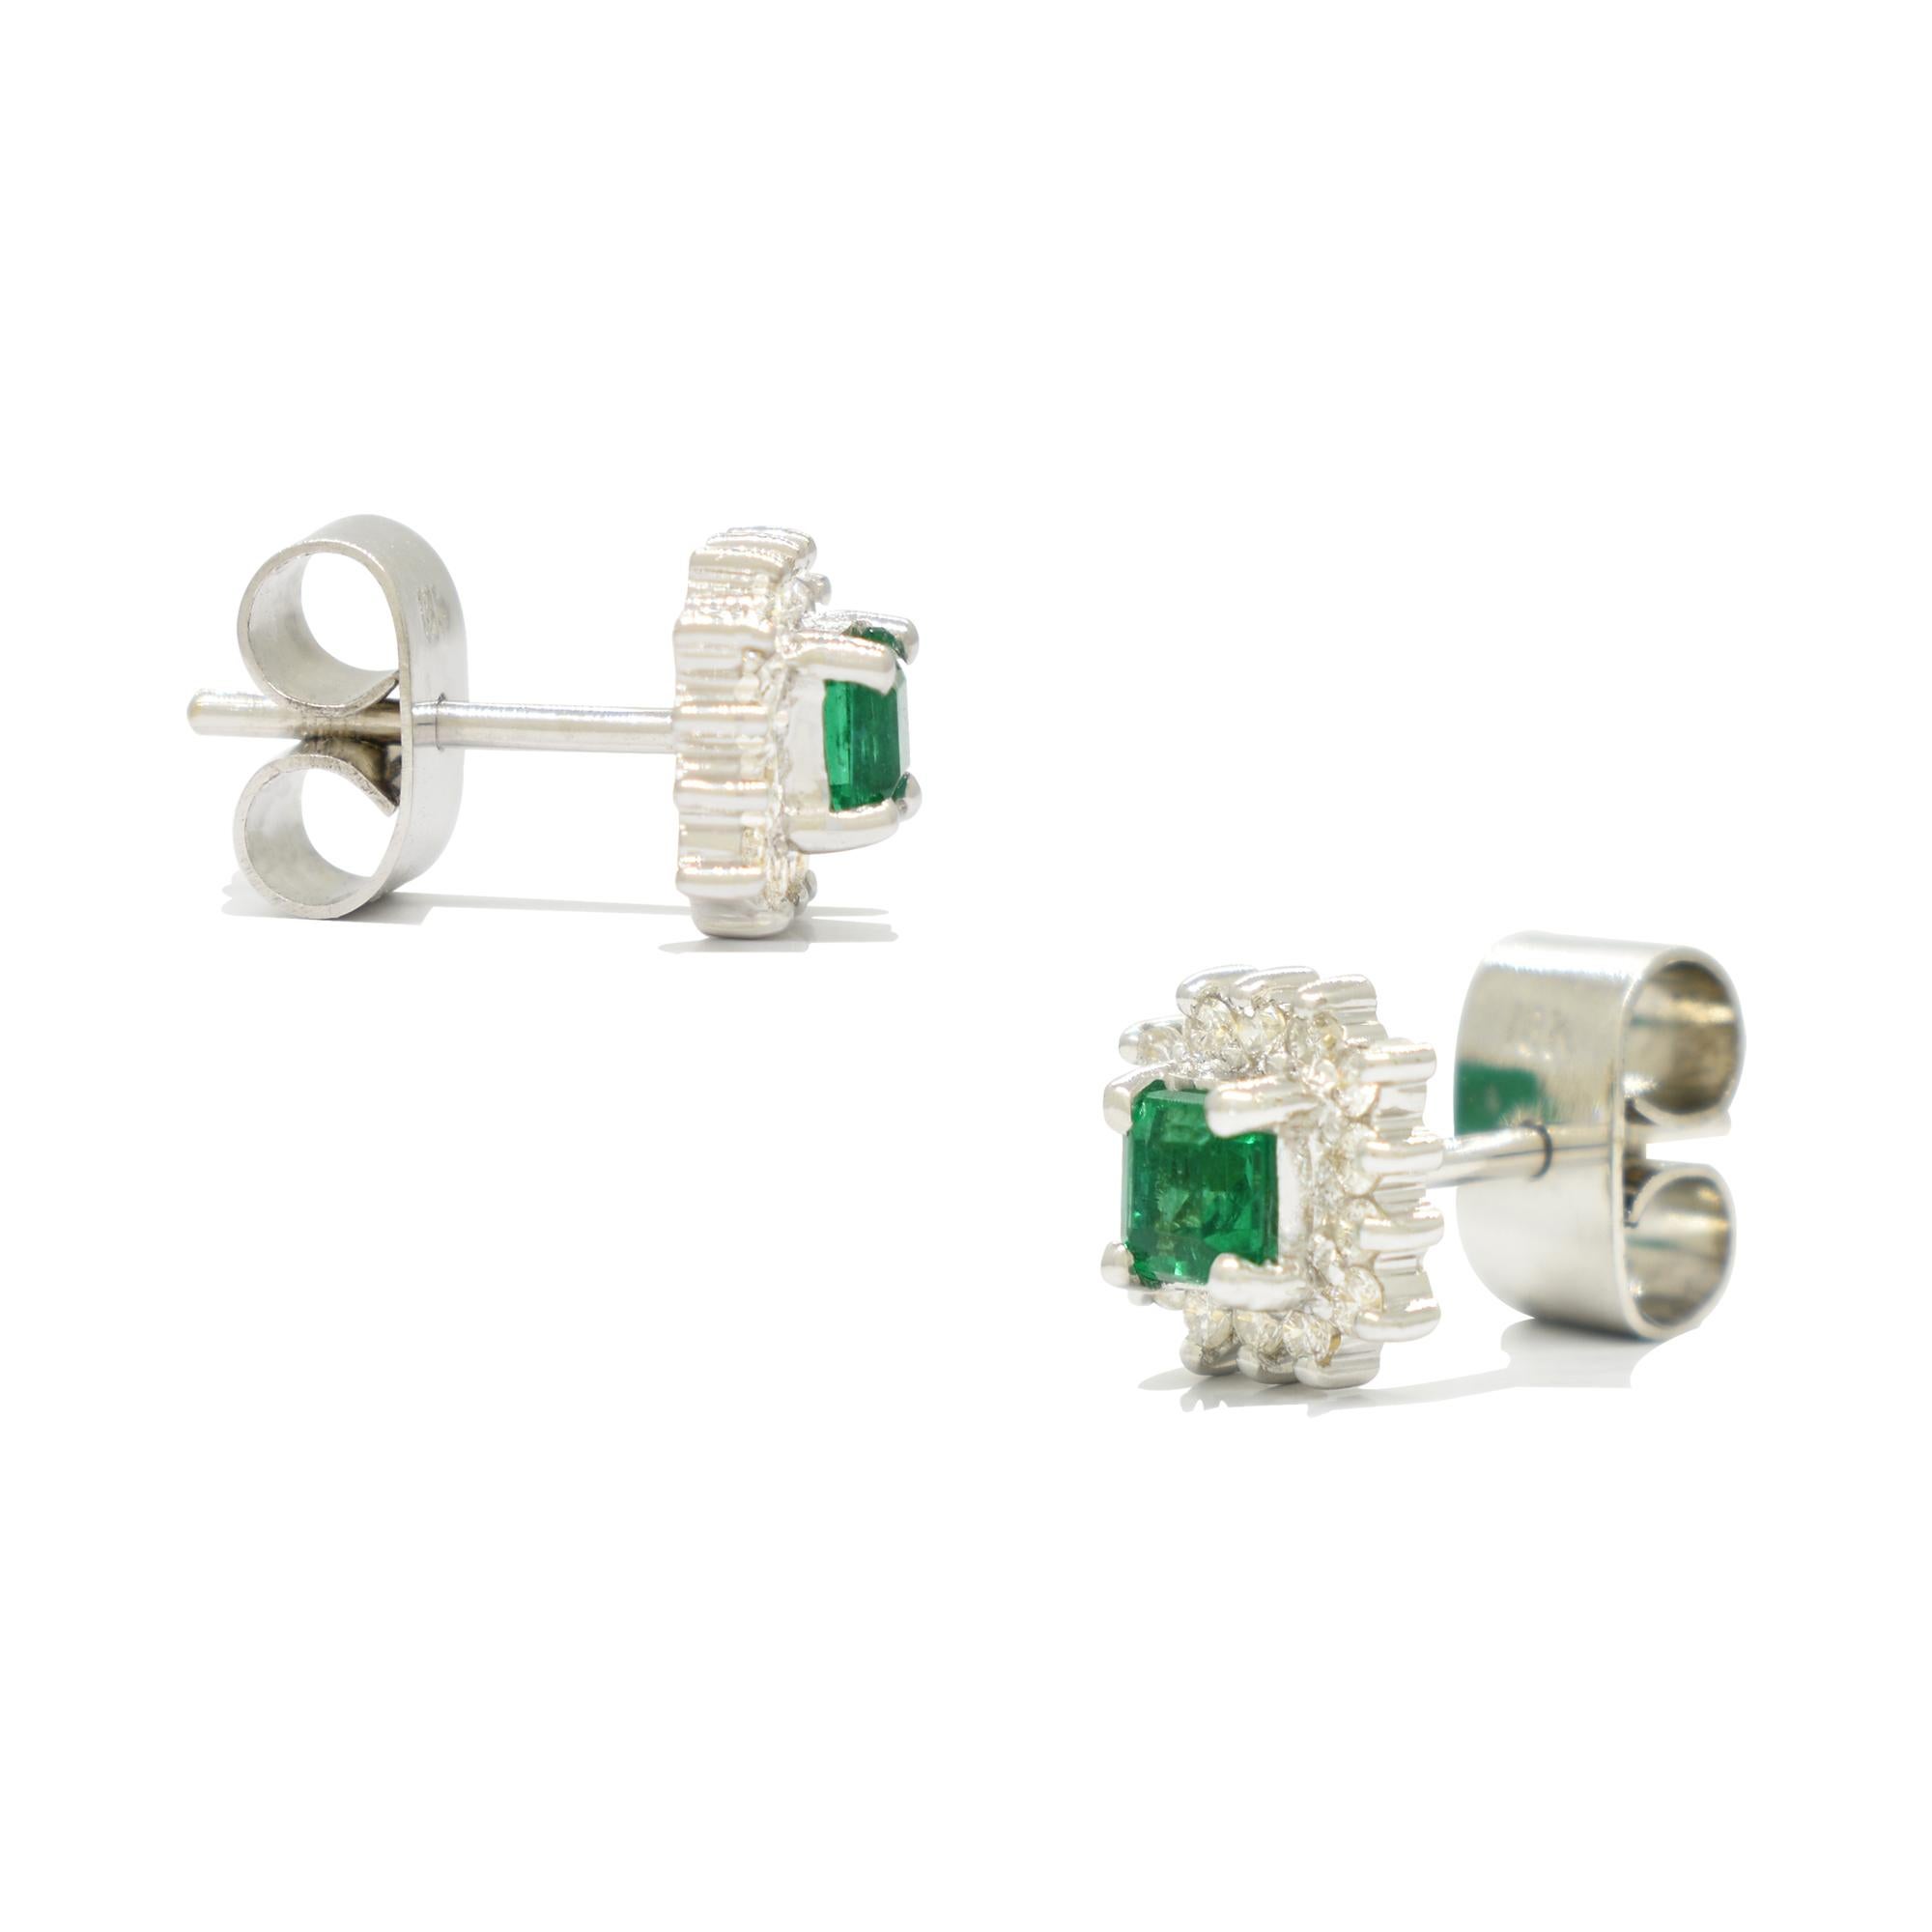 Small emerald and diamond stud earrings in 18K white gold; a timeless and exquisite set that effortlessly blends the allure of emeralds with the brilliance of diamonds. Crafted to perfection, these earrings feature two dark and brilliant green color